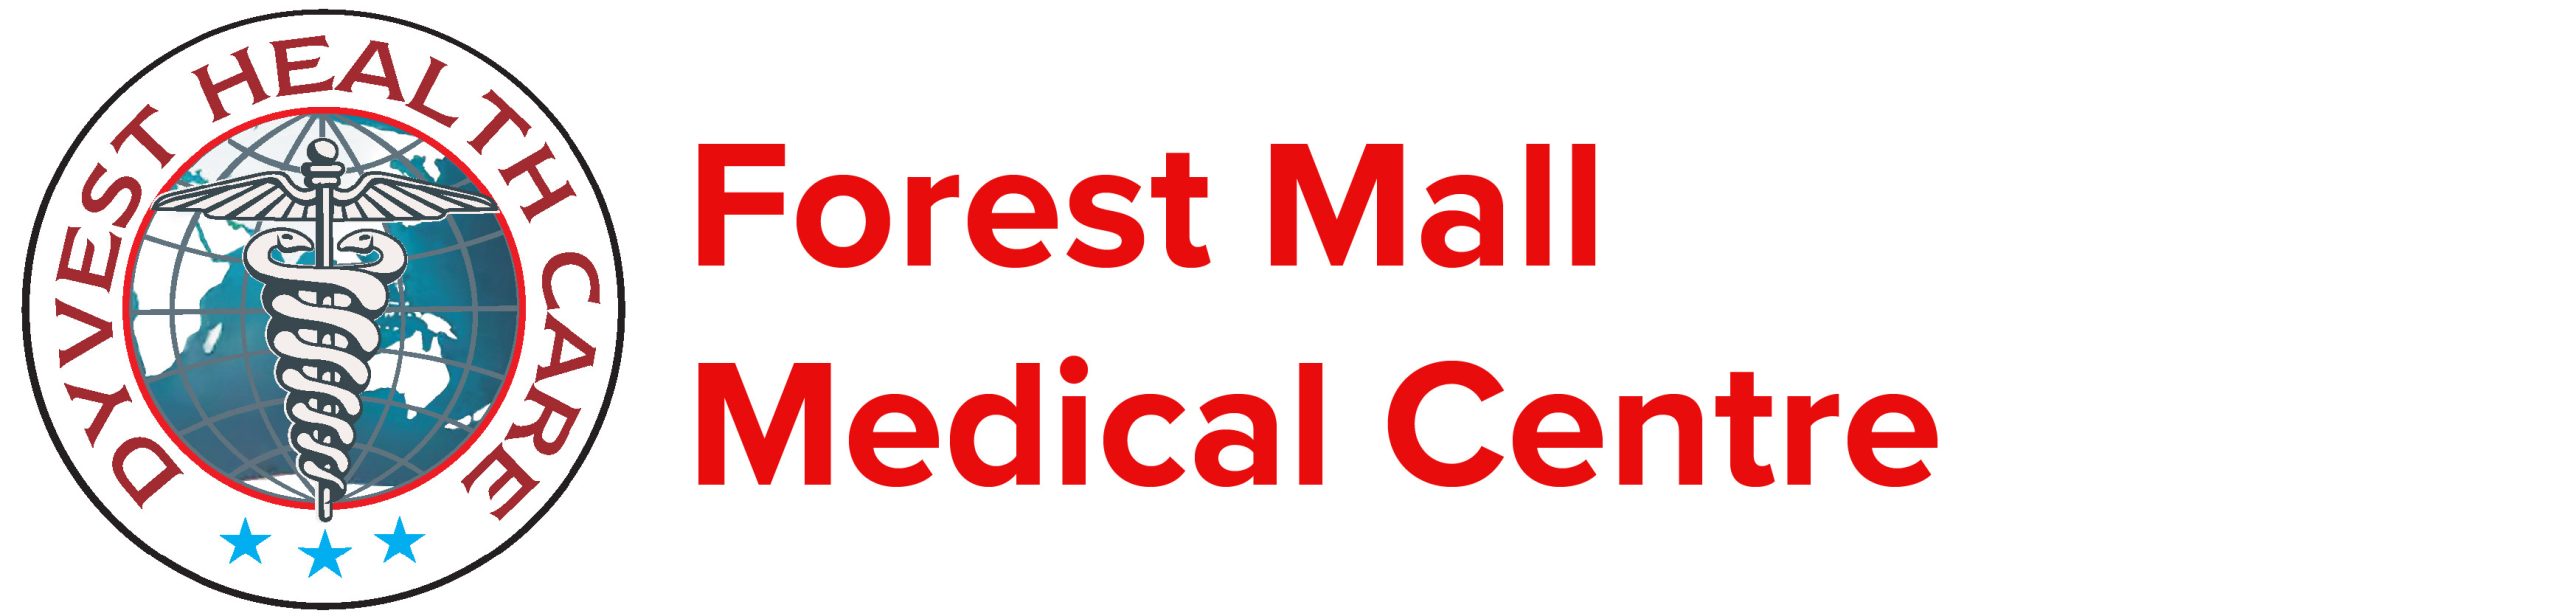 Forest Mall Medical Centre Logo